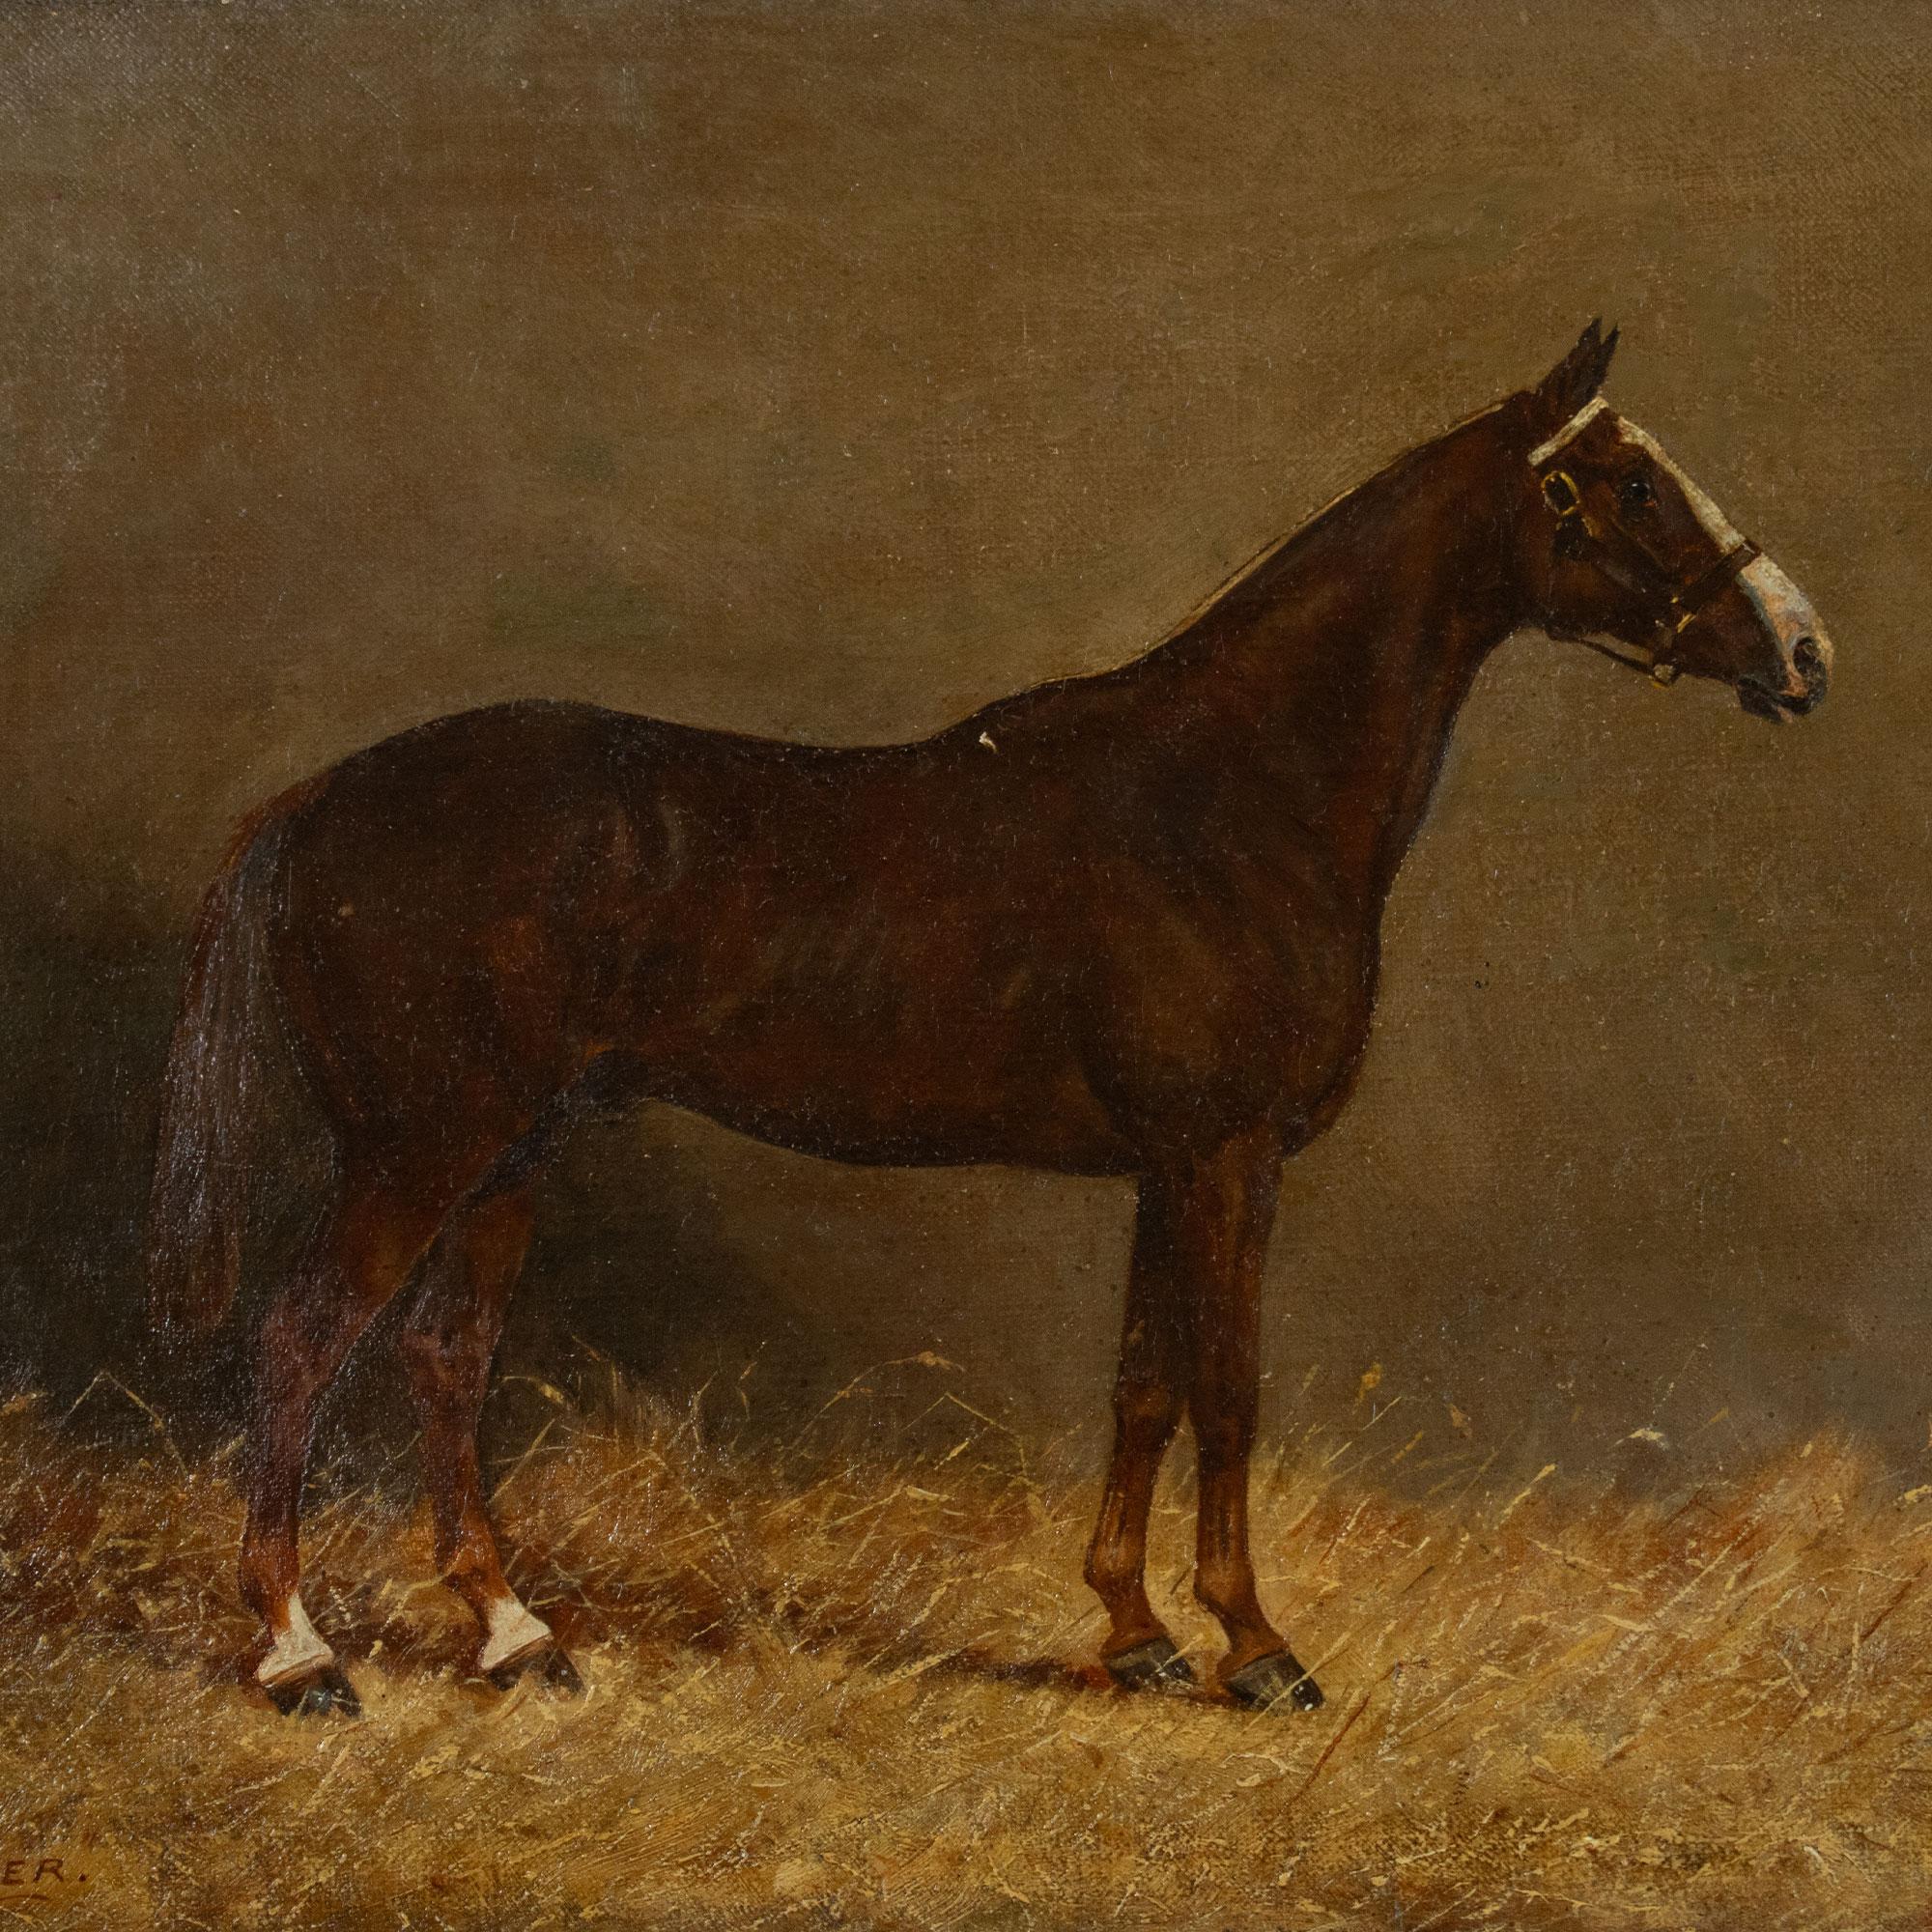 HENRY FREDERICK LUCAS LUCAS, (BRITISH, 1848 – 1943) - PLOVER, oil on canvas of a liver chestnut horse, signed lower right, inscribed with horse’s name lower left, inscribed verso ‘Plover’ The property of Miss Inge of Thorpe, painted by H. F. Lucas